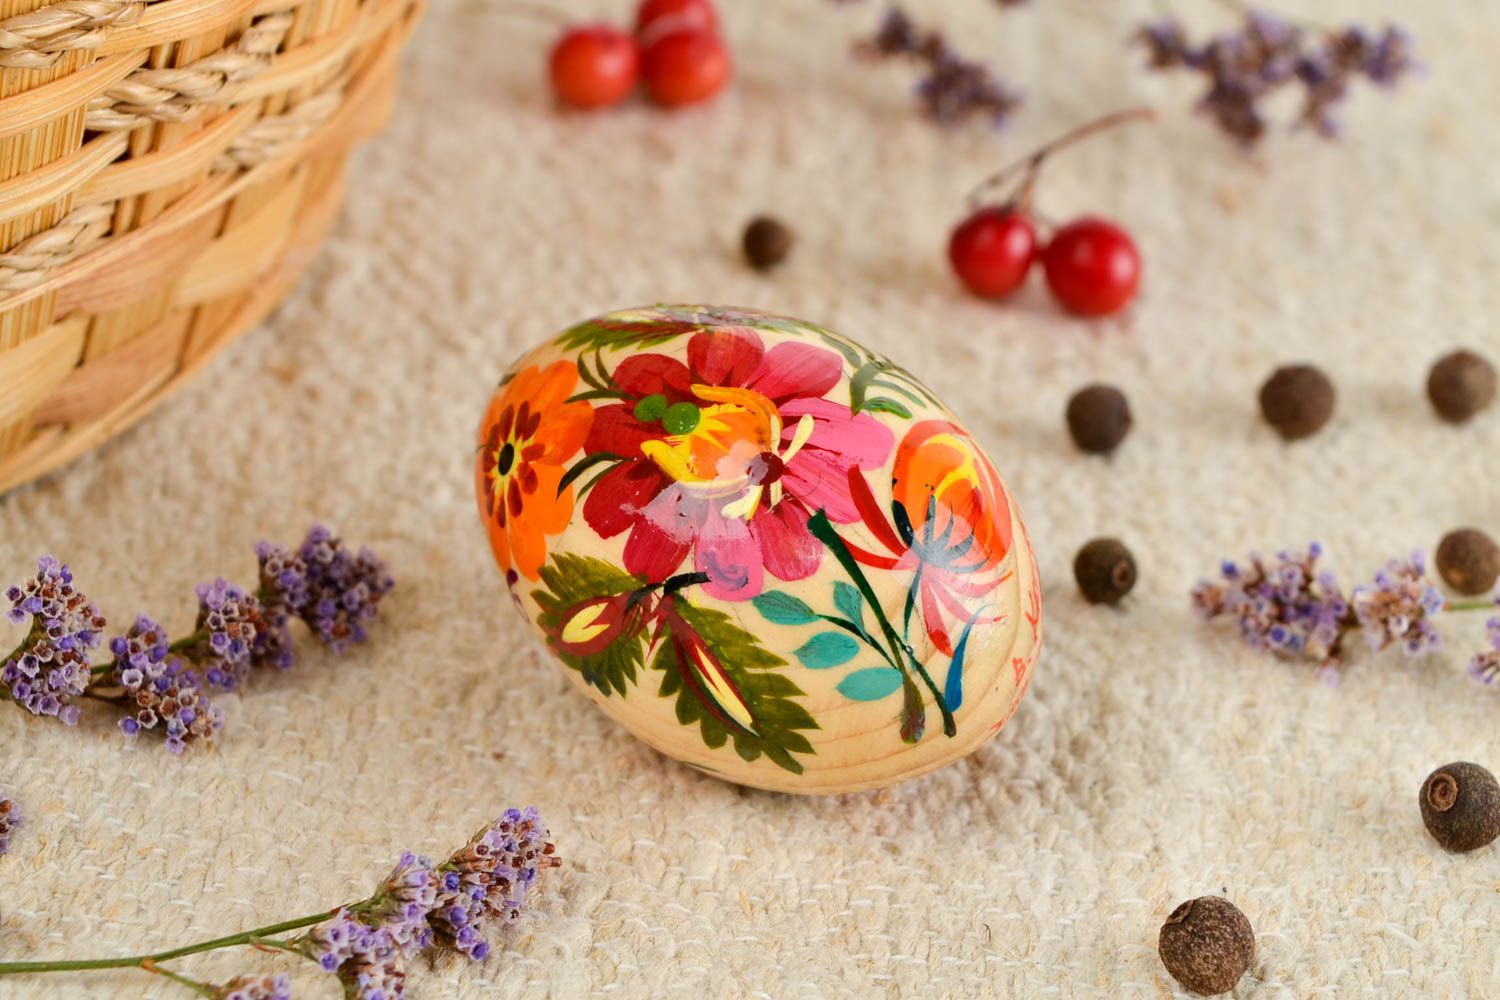 Unusual handmade wooden Easter egg modern decor gift ideas decorative use only photo 1